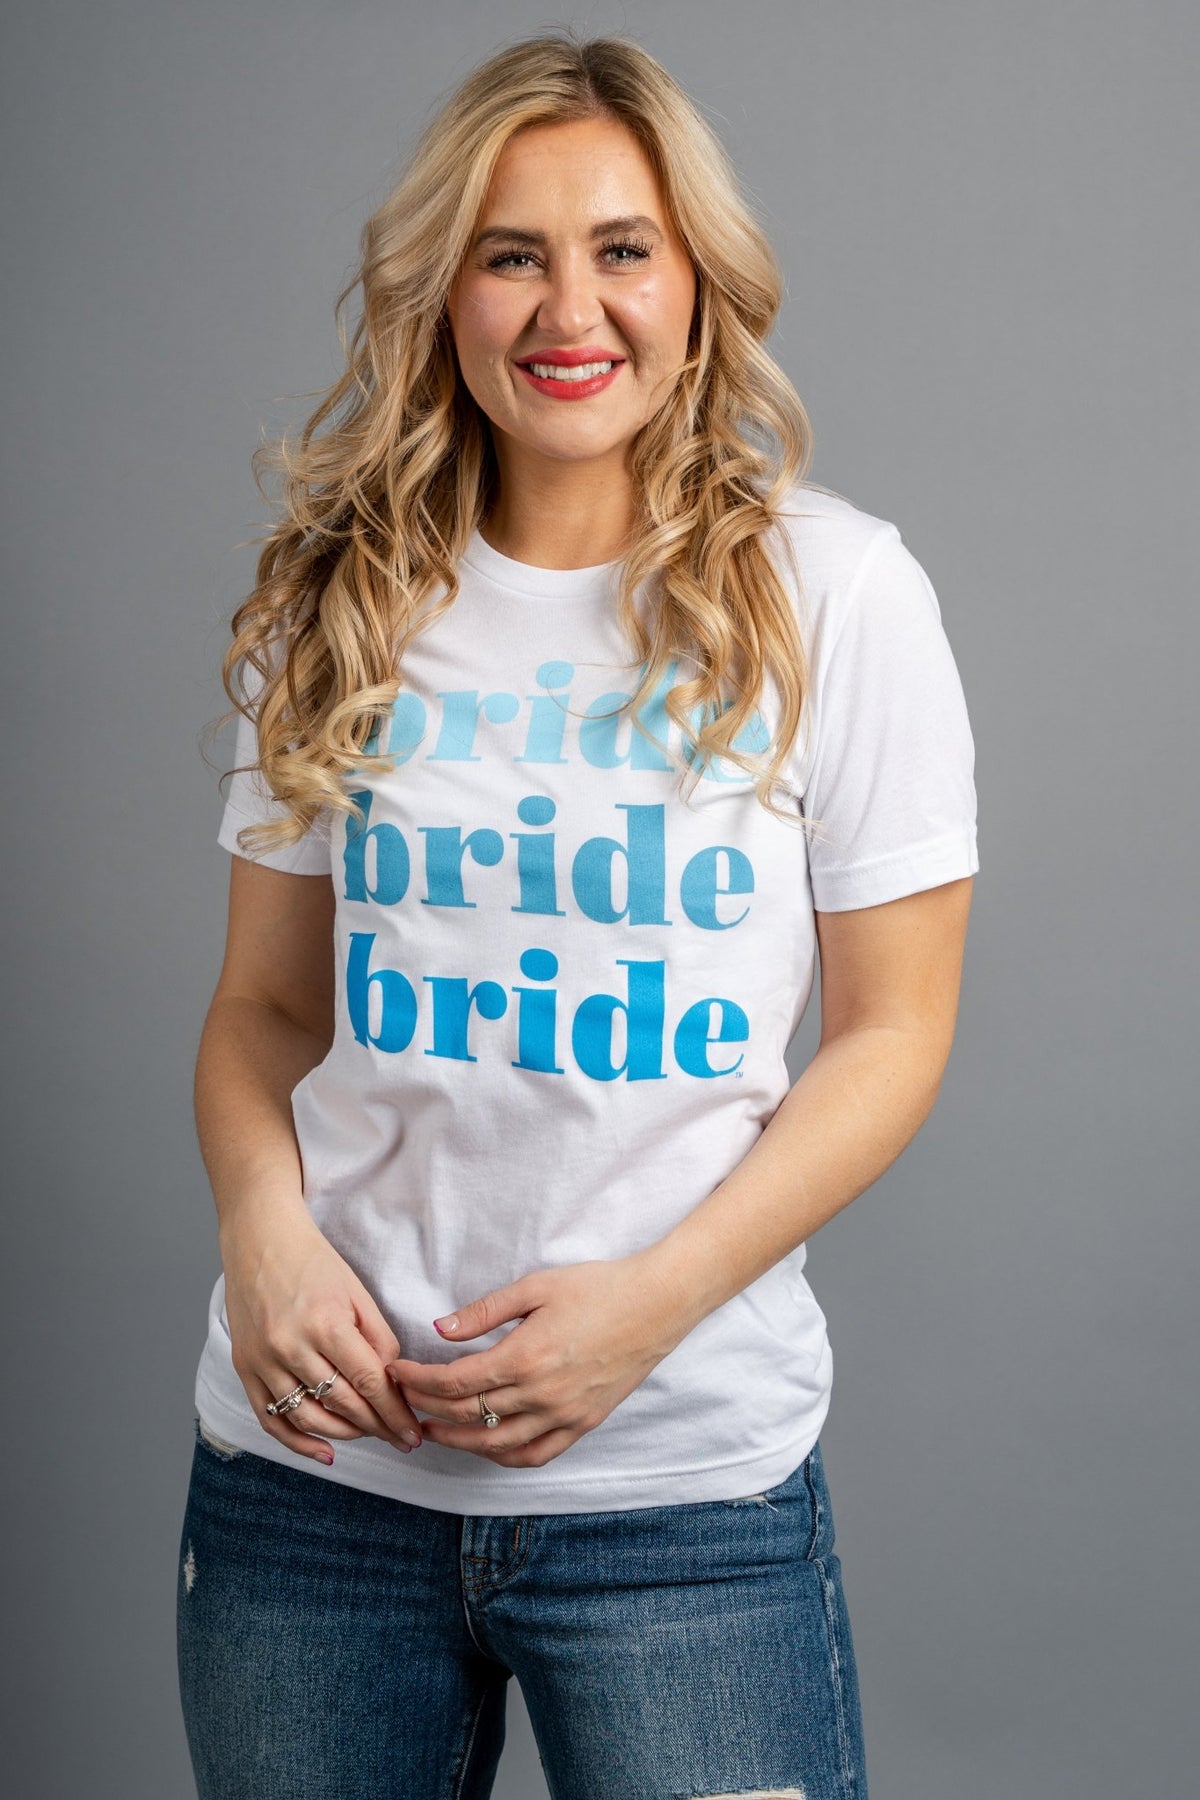 Bride repeater short sleeve t-shirt white - Stylish t-shirt - Trendy Graphic T-Shirts and Tank Tops at Lush Fashion Lounge Boutique in Oklahoma City